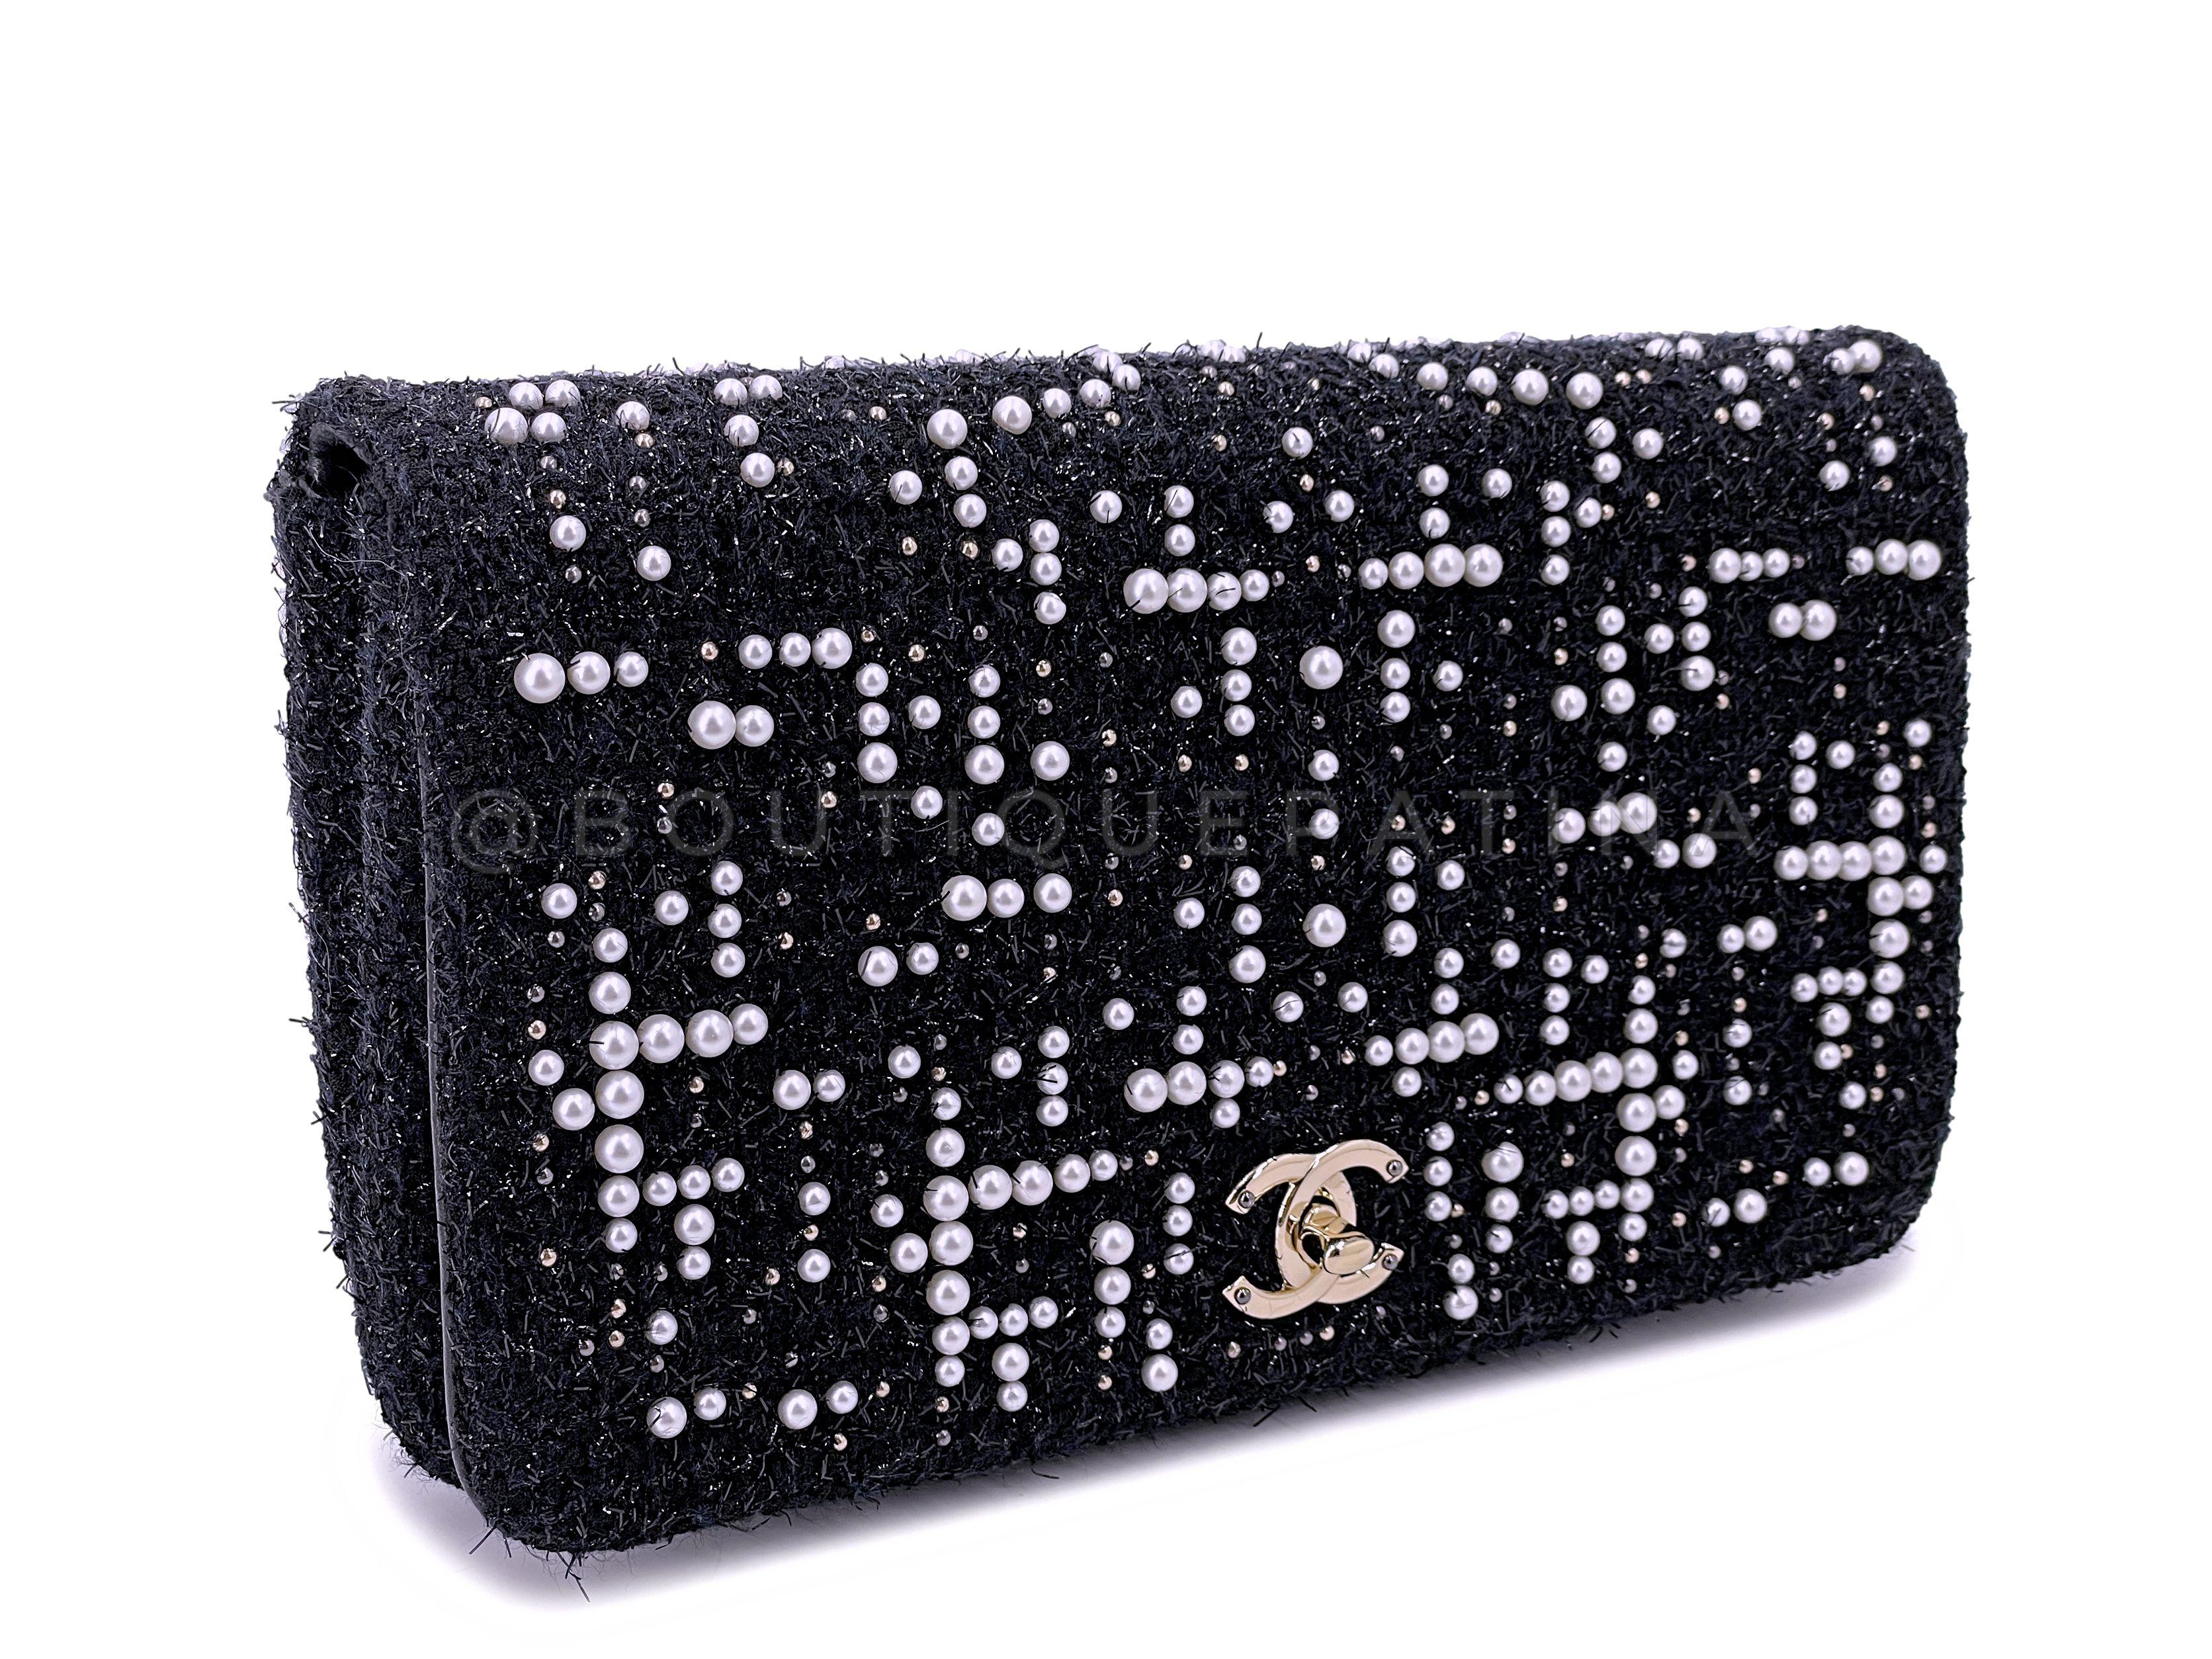 Store item: 67167
Unique to the 2017 Paris Cosmopolite collection is this very special pearl and fantasy tweed clutch. 

A substantial size at nearly 11 inches wide, with a back pocket for phone and turnlock front CC clasp opens to two main